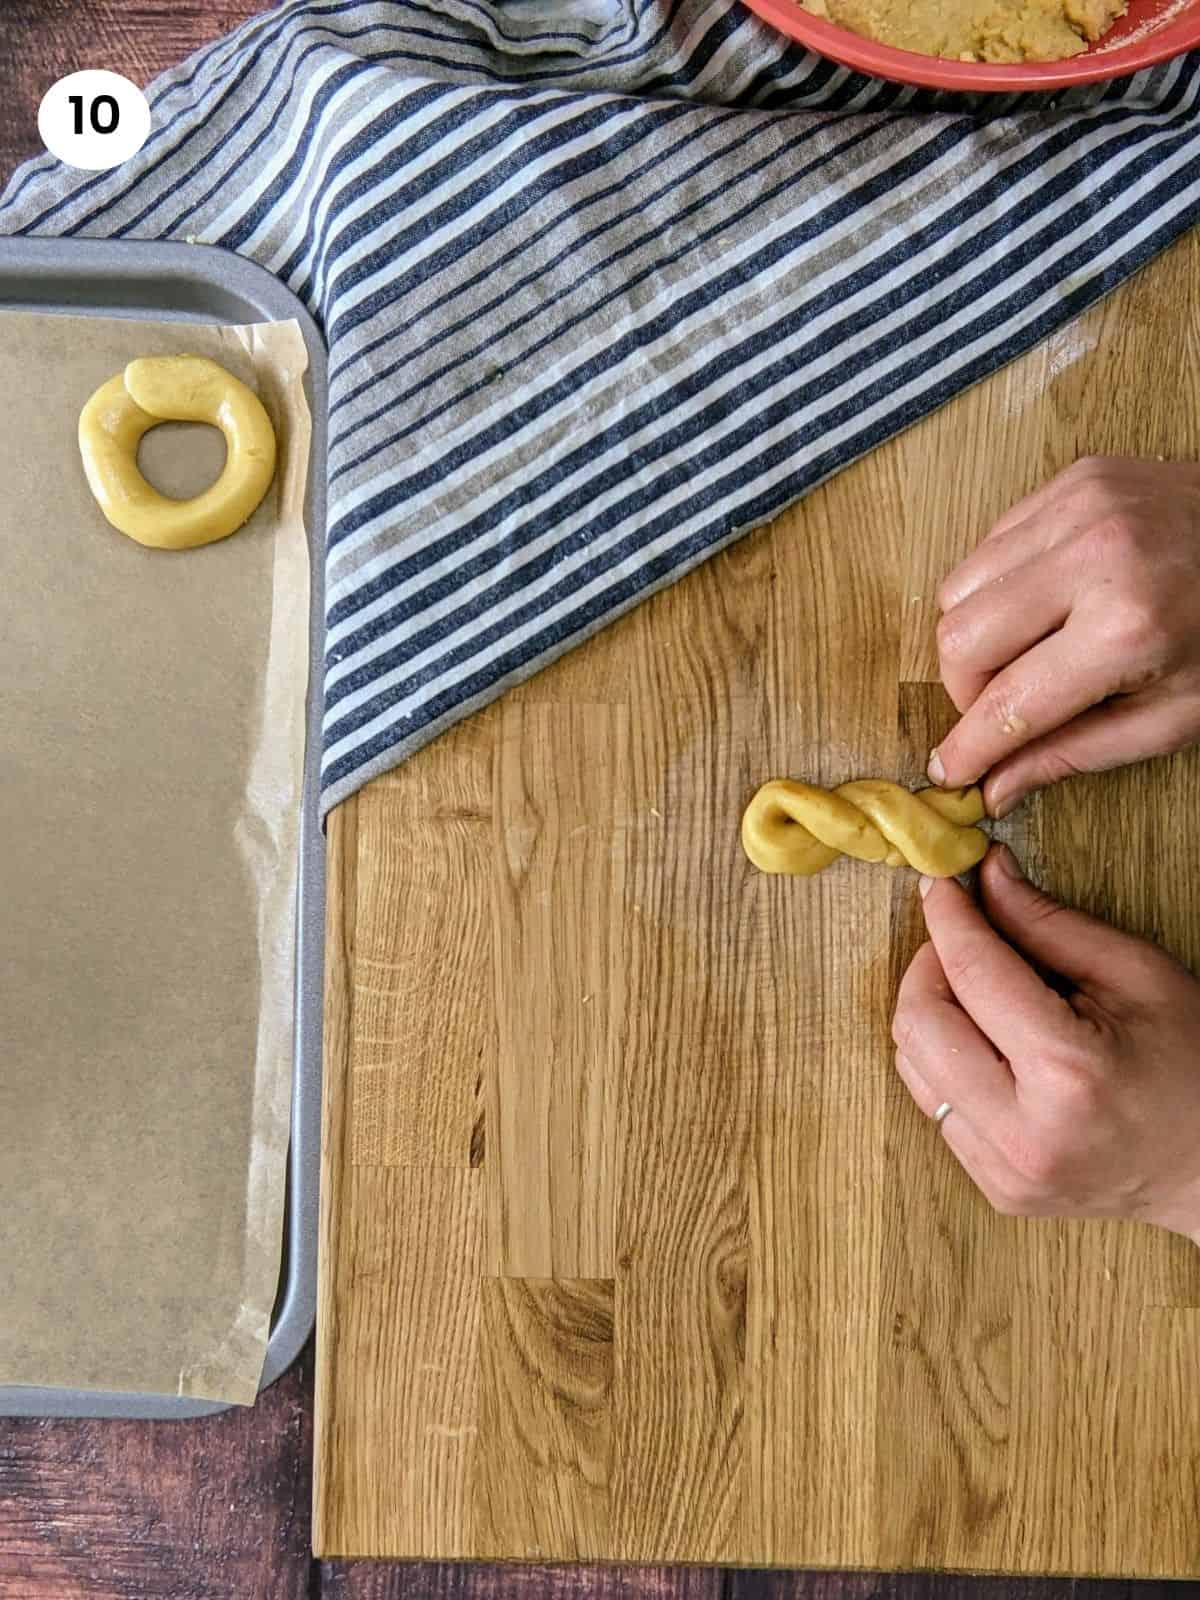 Shaping cookie dough into braid